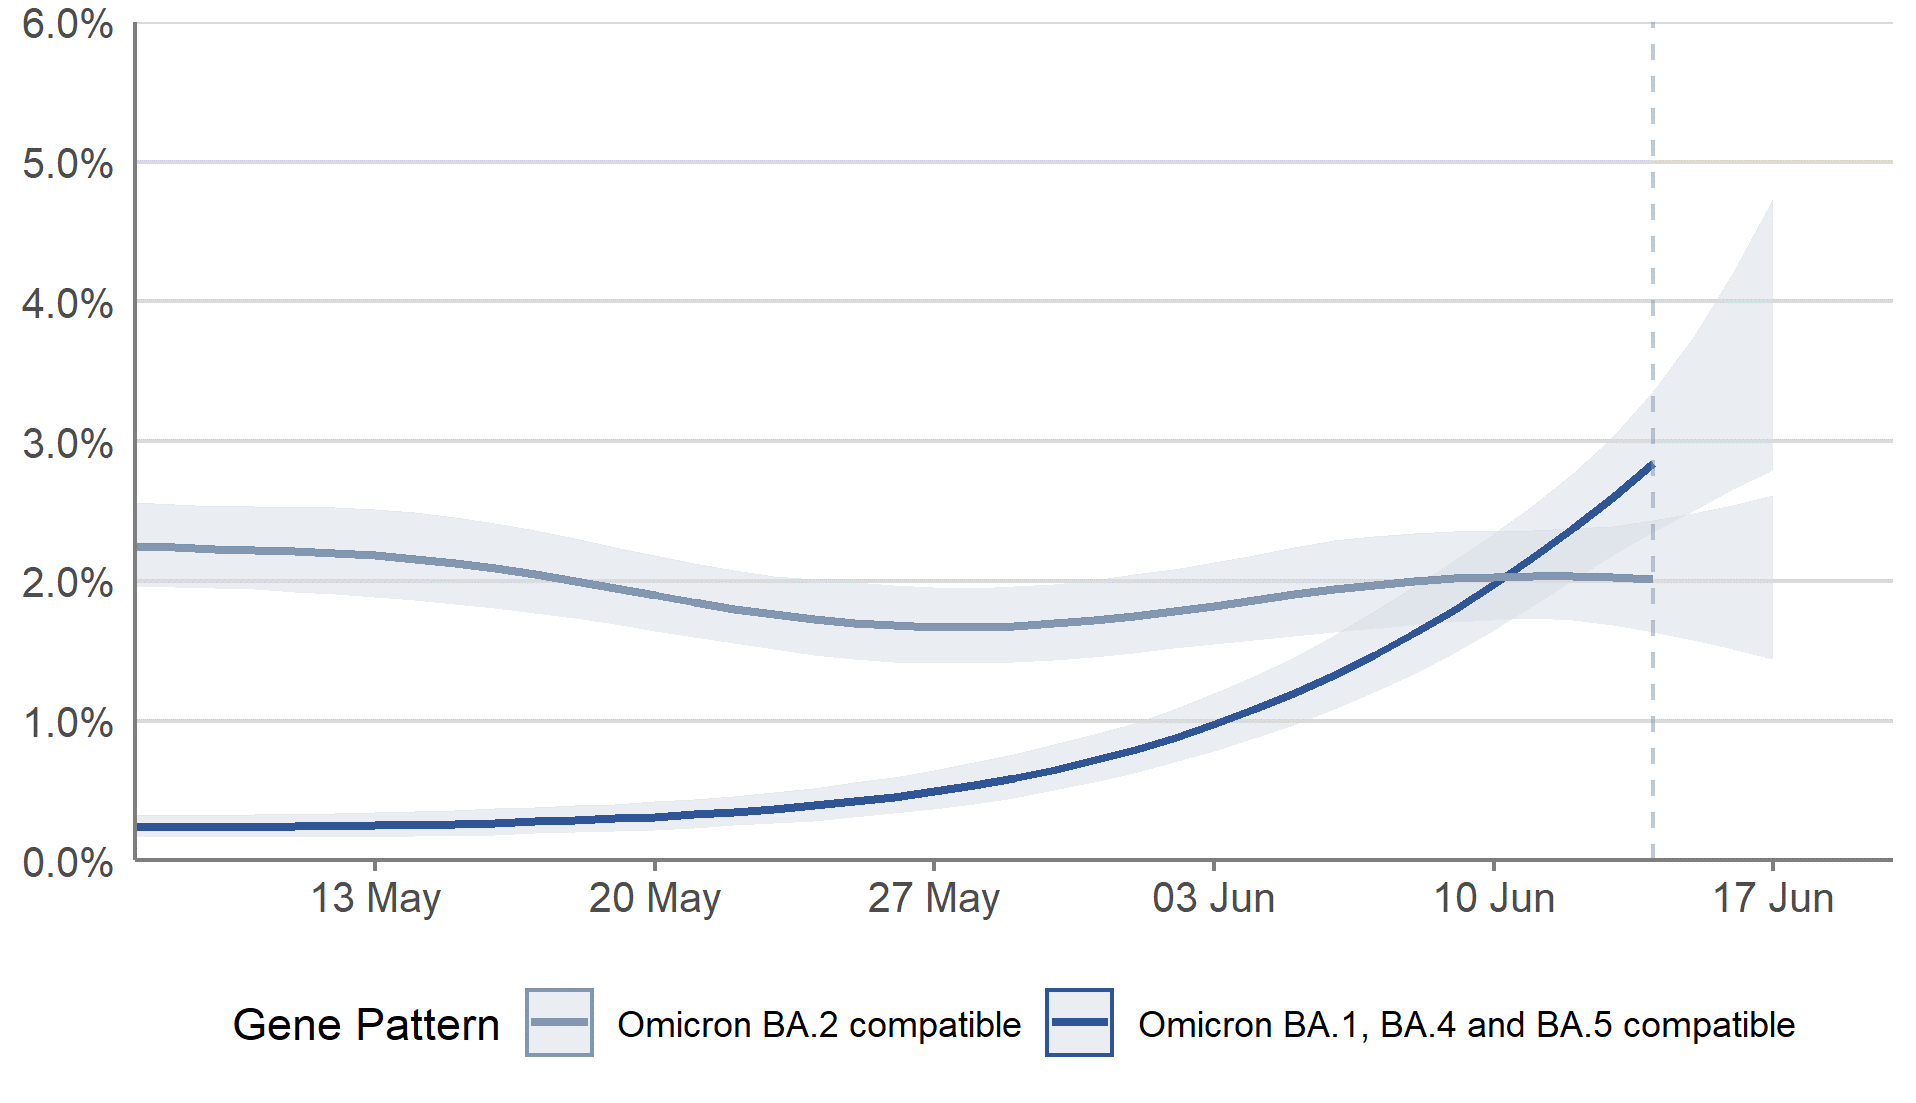 Figure 6: Modelled daily estimates of the percentage of the population in Scotland testing positive with infections compatible with Omicron BA.1, BA.4 and BA.5 and compatible with Omicron BA.2, between 7 May and 17 June 2022, including 95% credible intervals  A line chart showing modelled daily estimates of the percentage of the population in Scotland testing positive for COVID-19 by variant, between 7 May and 17 June 2022. Modelled daily estimates are represented by two lines with 95% credible intervals in pale blue shading. The lines are blue for Omicron BA.1, BA.4 and BA.5 compatible infections and grey for Omicron BA.2 compatible infections. A vertical dashed line near the end of the series indicating greater uncertainty in estimates for the last three reported days. The percentage of people testing positive for COVID-19 compatible with Omicron BA.1, BA.4 and BA.5 increased in the week 11 to 17 June 2022. Meanwhile the trend in the percentage of people with infections compatible with Omicron variant BA.2 was uncertain.